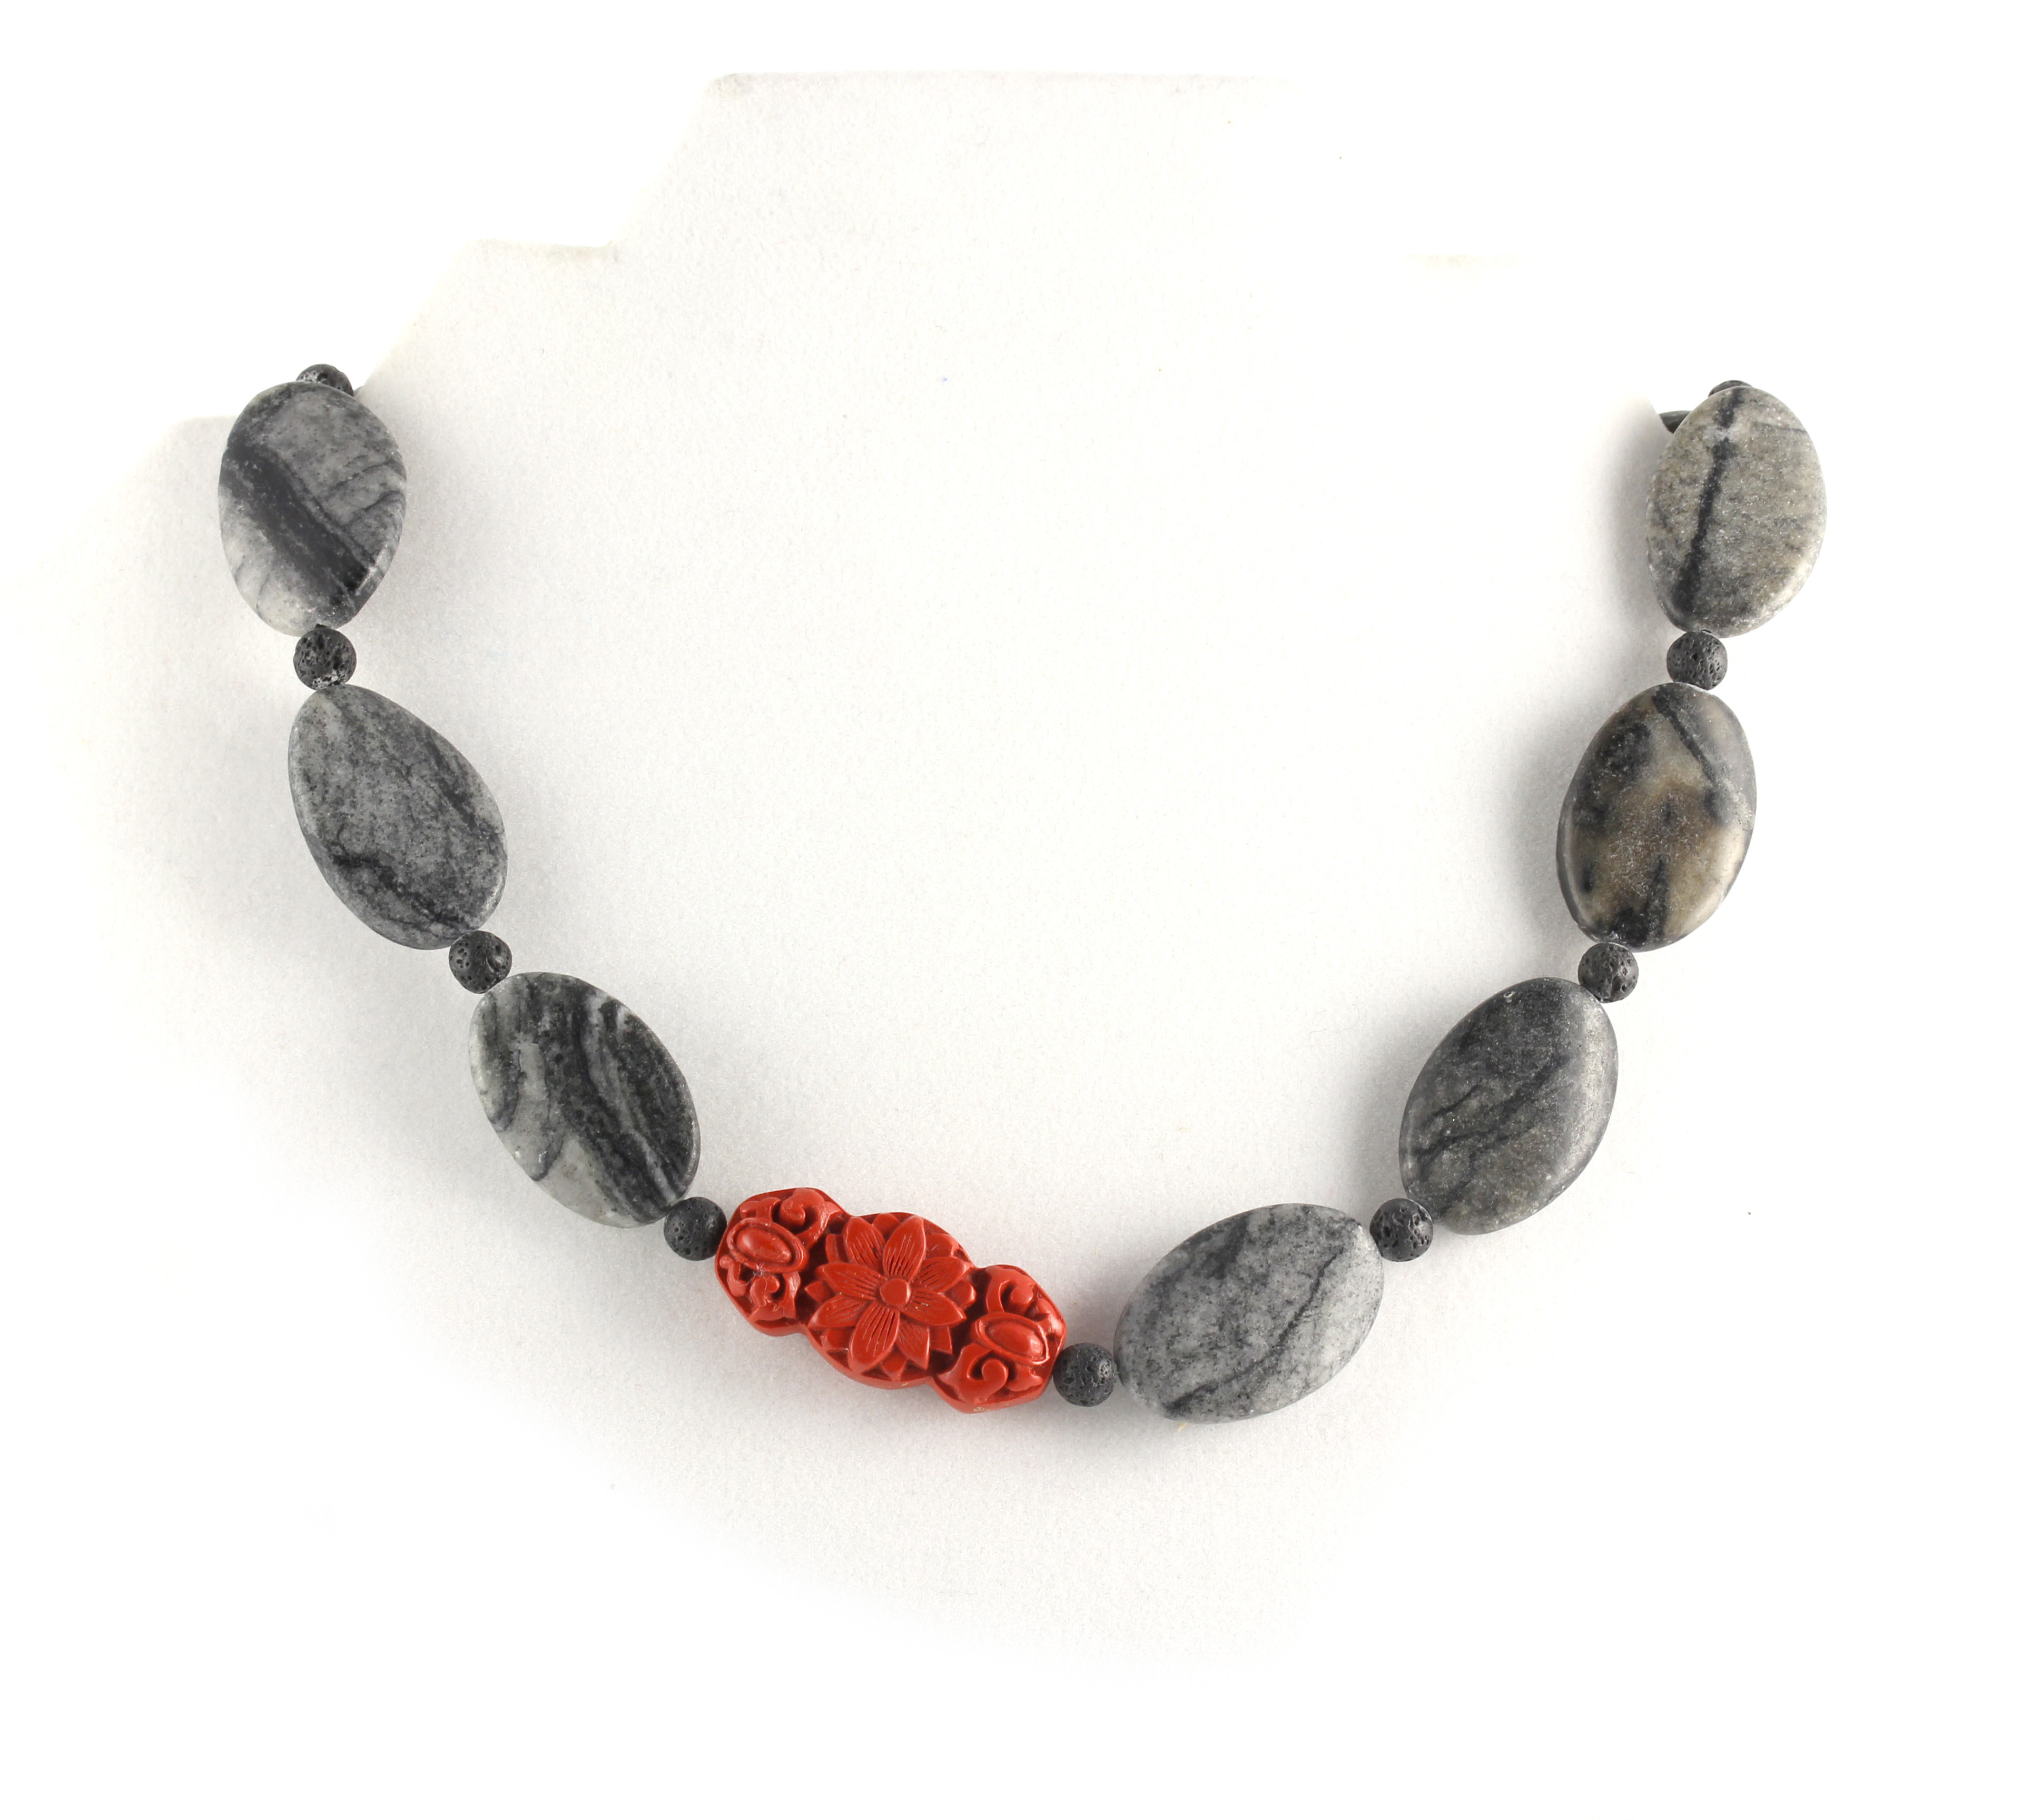 Gray/black Picasso jasper necklace with red cinnabar focal